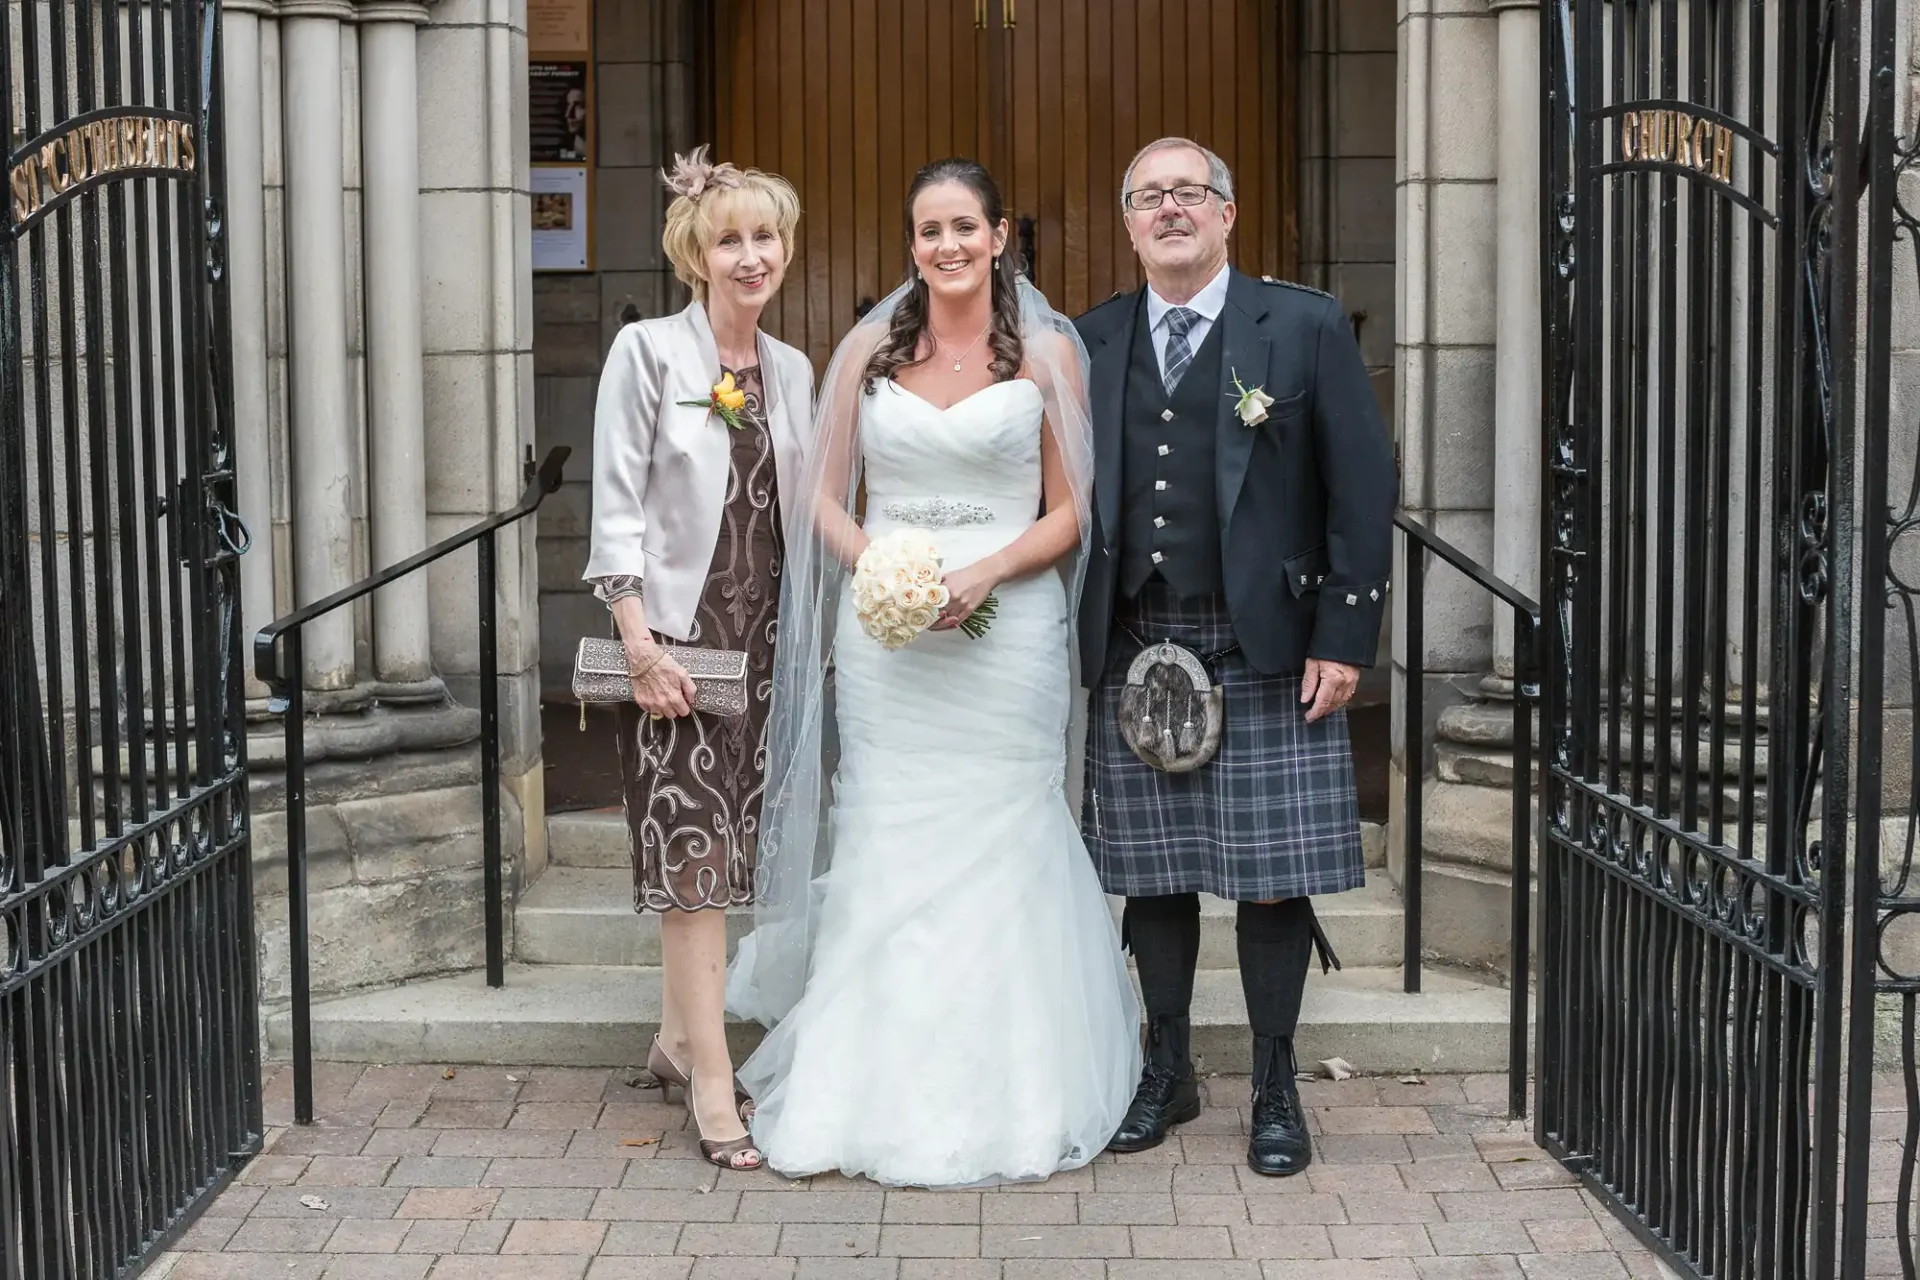 A bride in a white dress stands with an older couple dressed in formal attire, including tartan elements, outside a church gate.